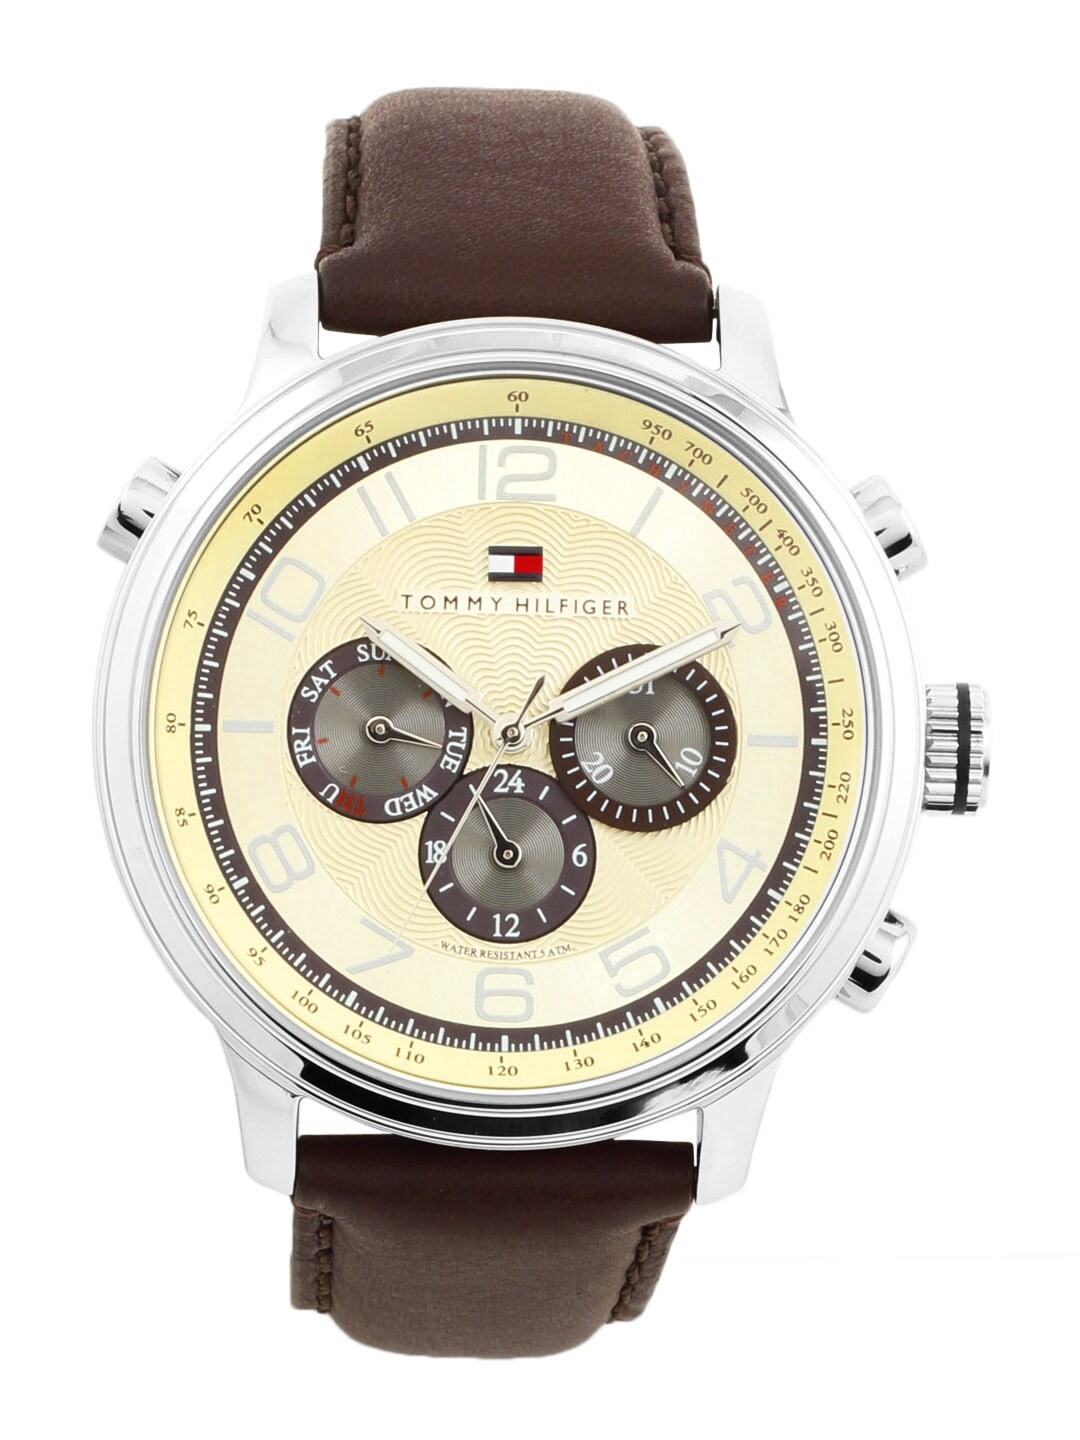 Tommy Hilfiger Men Cream-Coloured Dial Chronograph Watch TH1790767-D